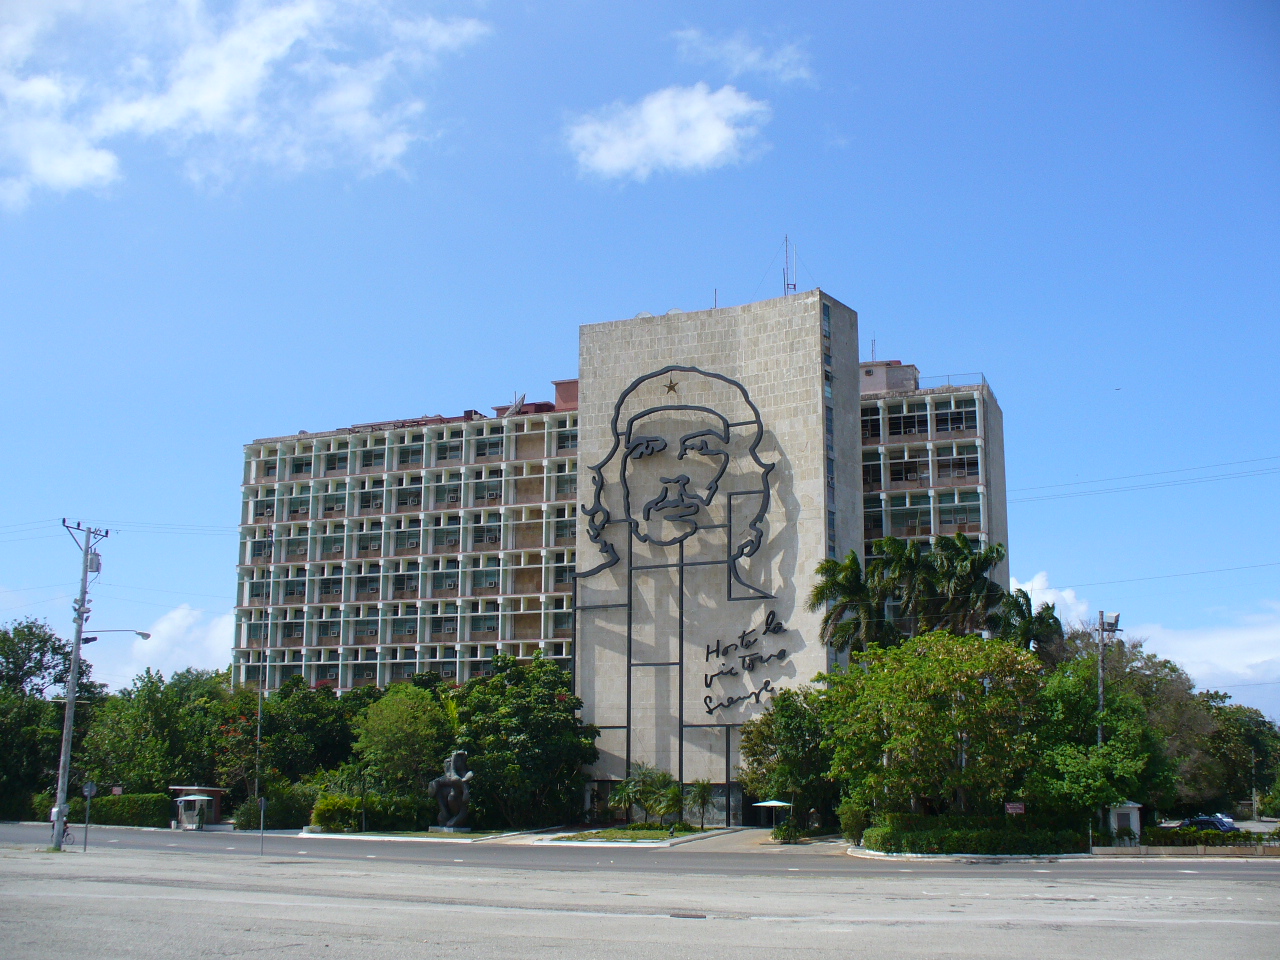 a picture of a person on the side of a large building